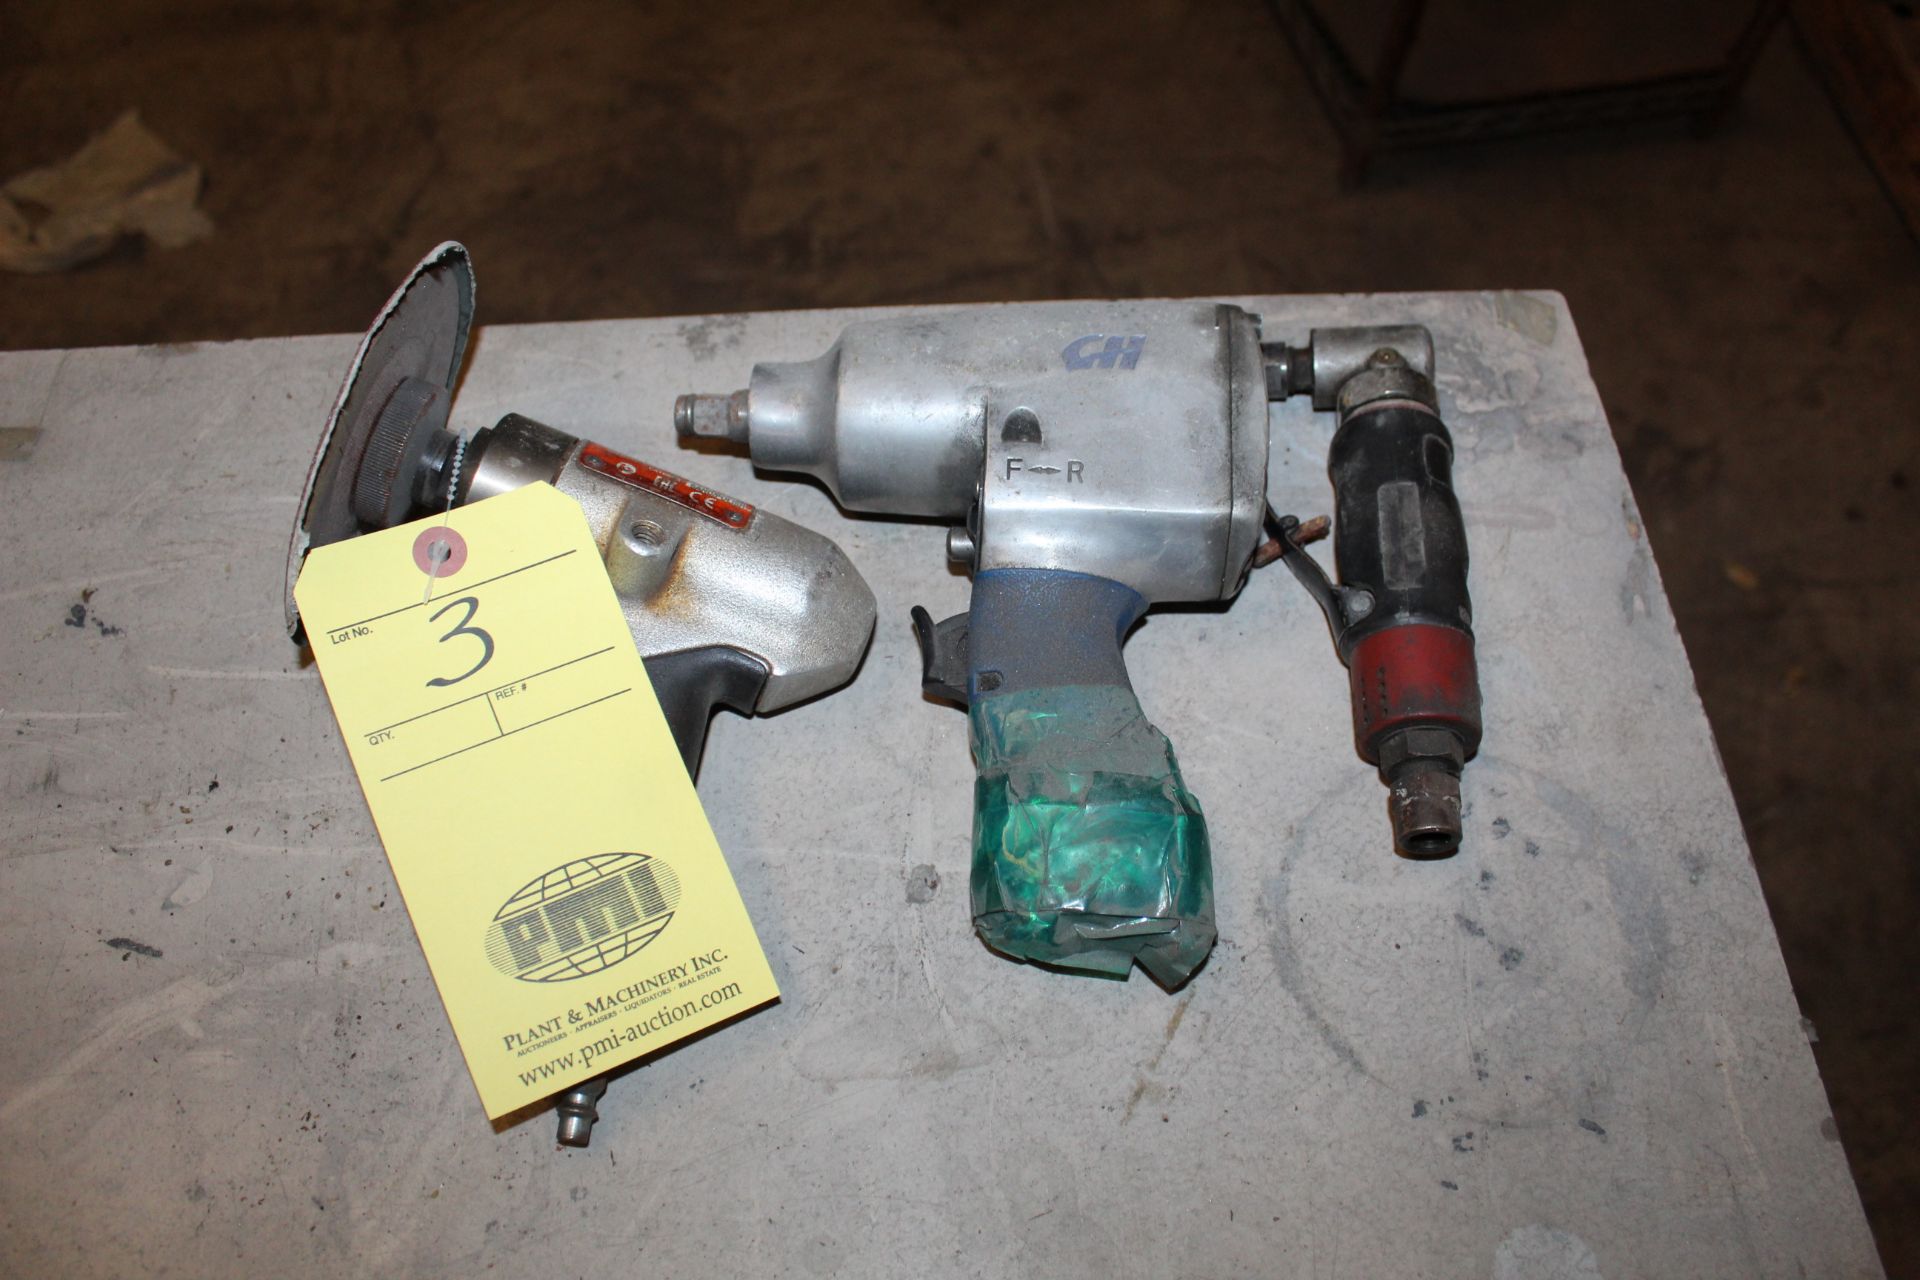 LOT OF PNEUMATIC TOOLS, right angle (Located at: Accurate, Inc., 1200 East 4th Street, Taylor, TX